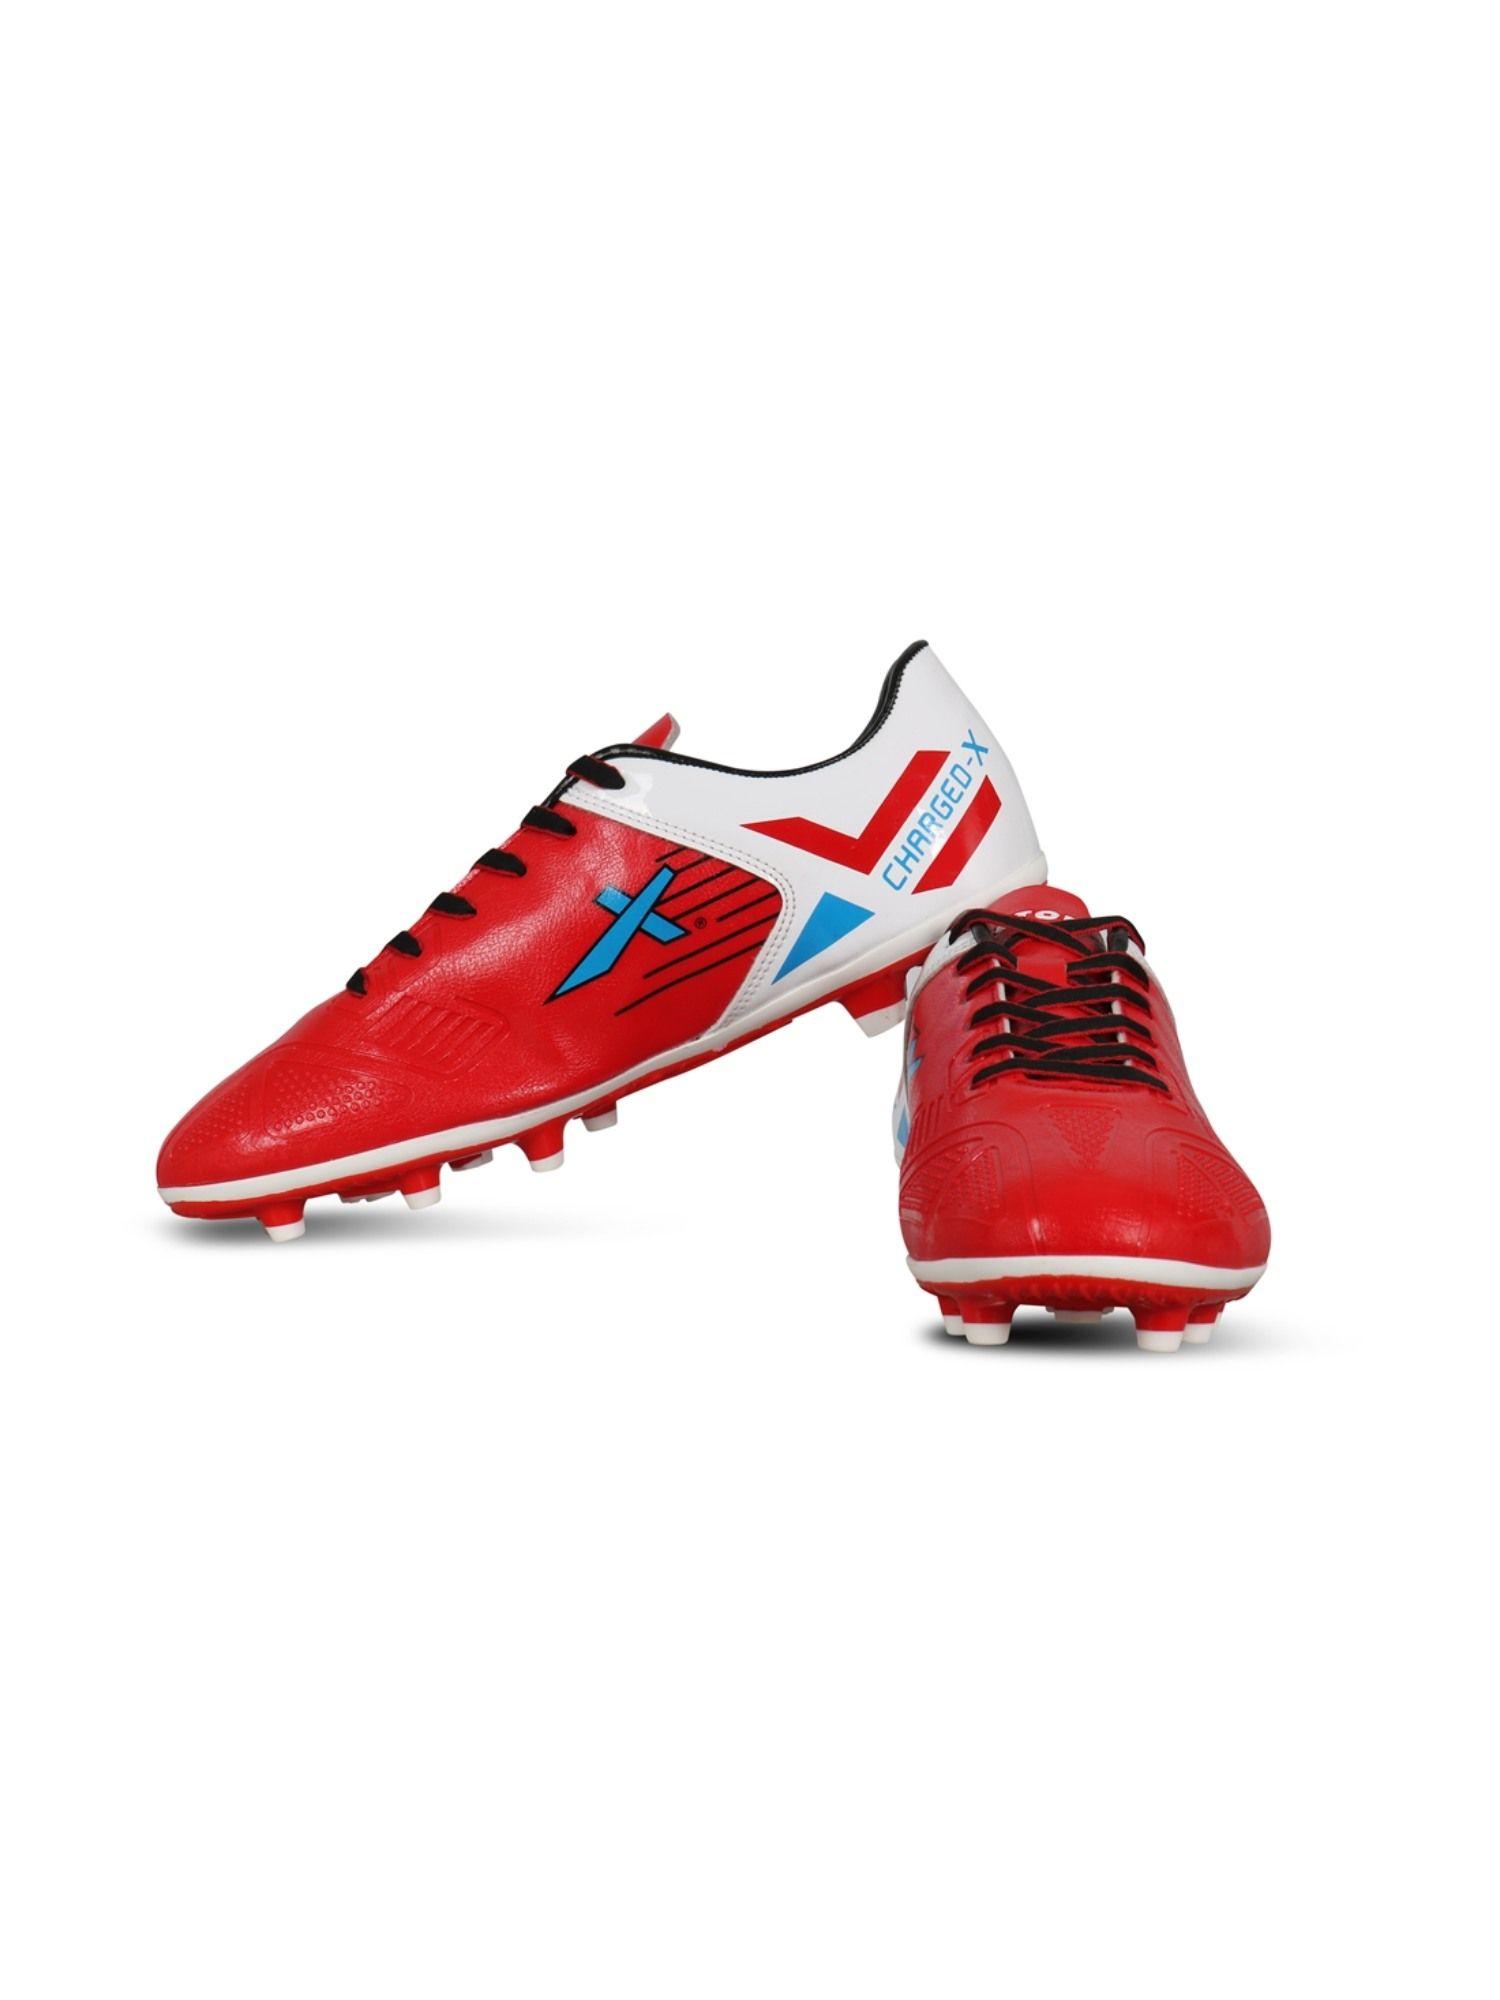 charged-x football shoes for men (red-white-blue)